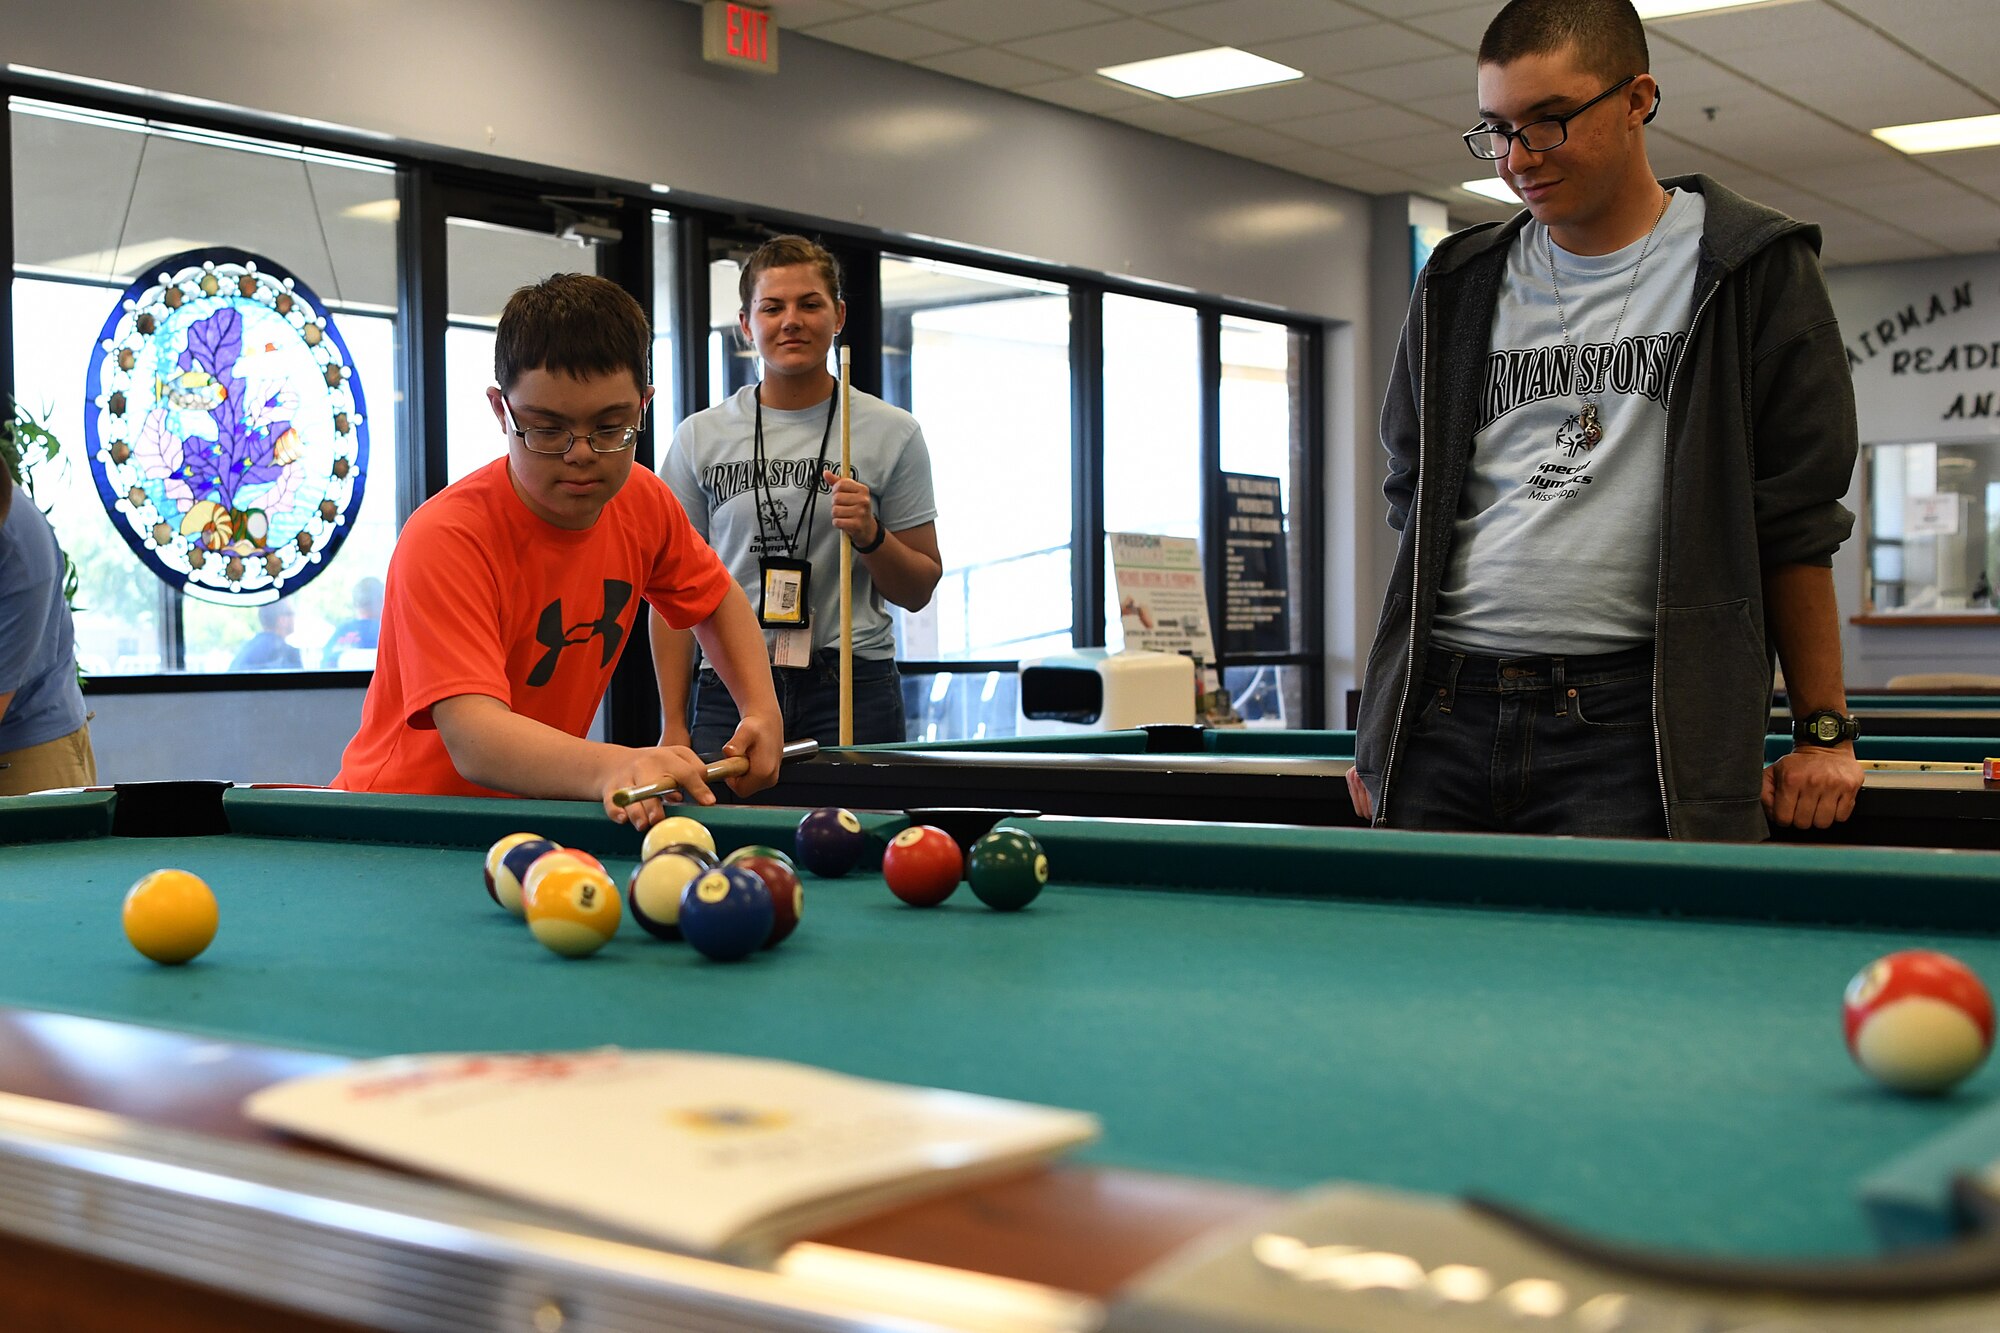 Easton Slutz, District 5 Special Olympics Mississippi athlete, plays pool with U.S. Air Force Airmen Kaimryn Hursch and Gabriel Agostini-Mesa, 336th Training Squadron students, during SOMS in the Levitow Training Support Facility at Keesler Air Force Base, Mississippi, May 11, 2018. On the first day of SOMS, Slutz, Agostini-Mesa and Hursch spent the day getting to know each other by playing pool, basketball and dominoes. (U.S. Air Force photo by Airman 1st Class Suzie Plotnikov)